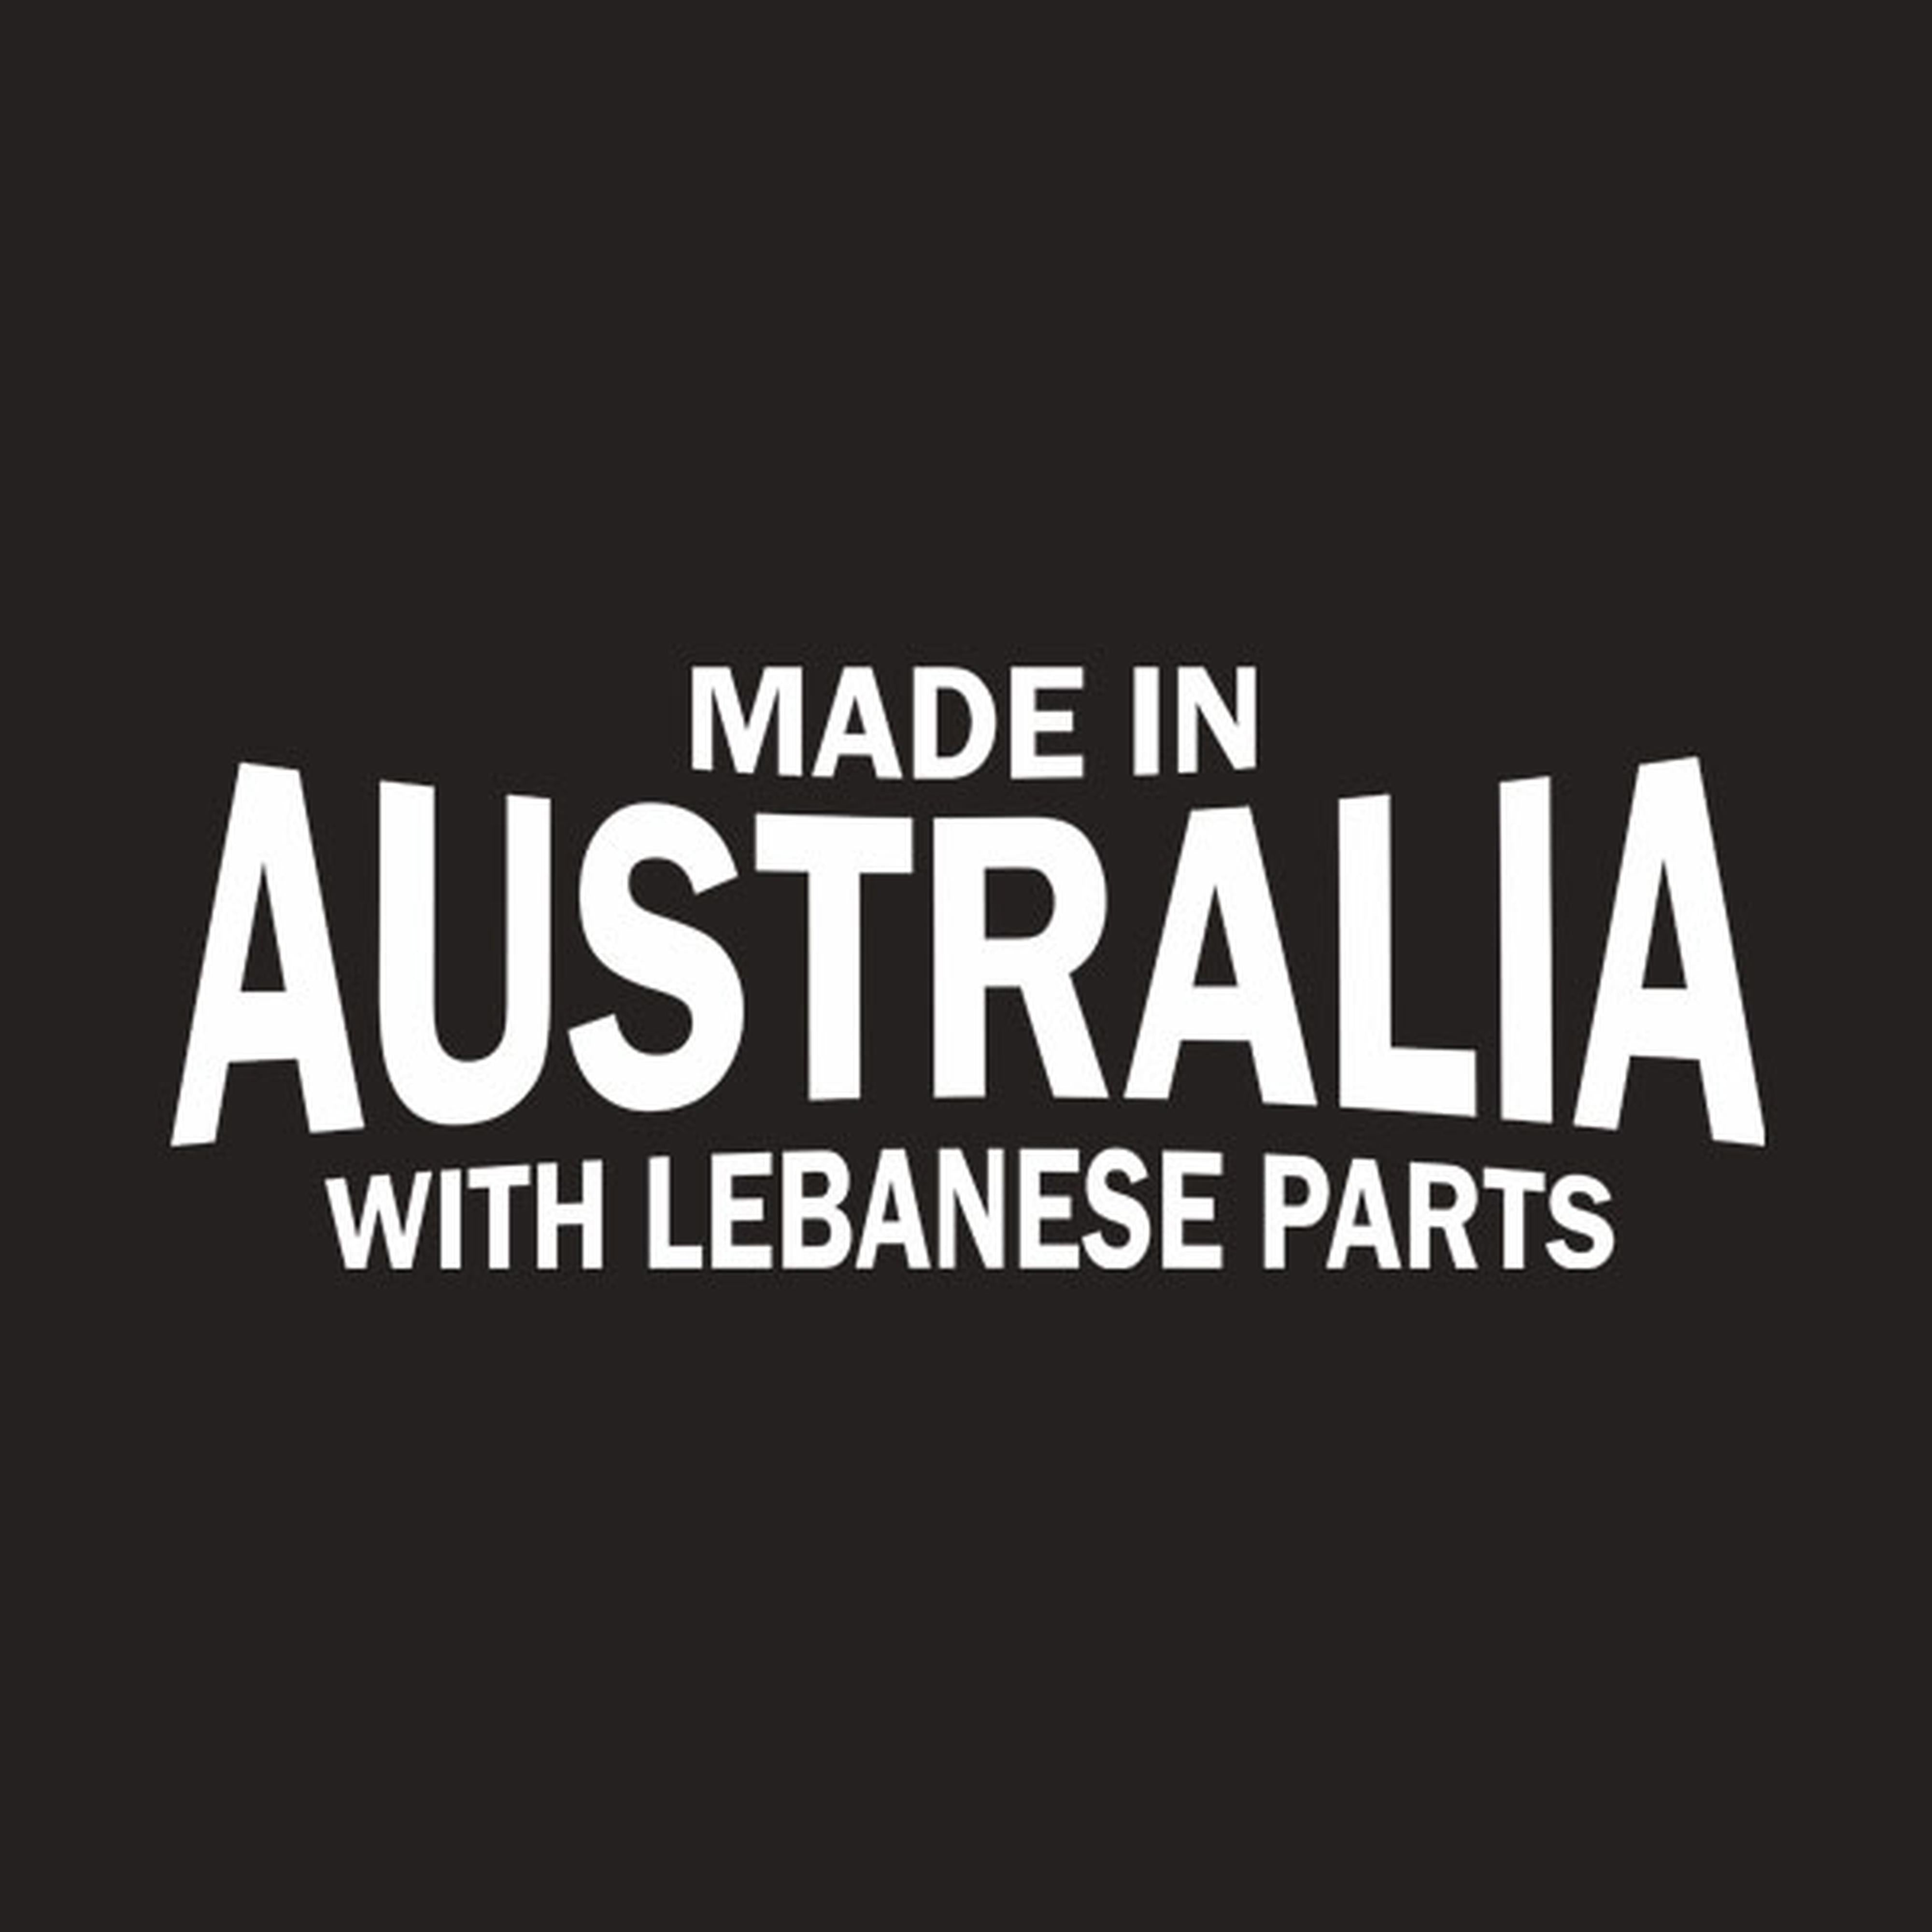 Made in Australia with Lebanese parts - T-shirt